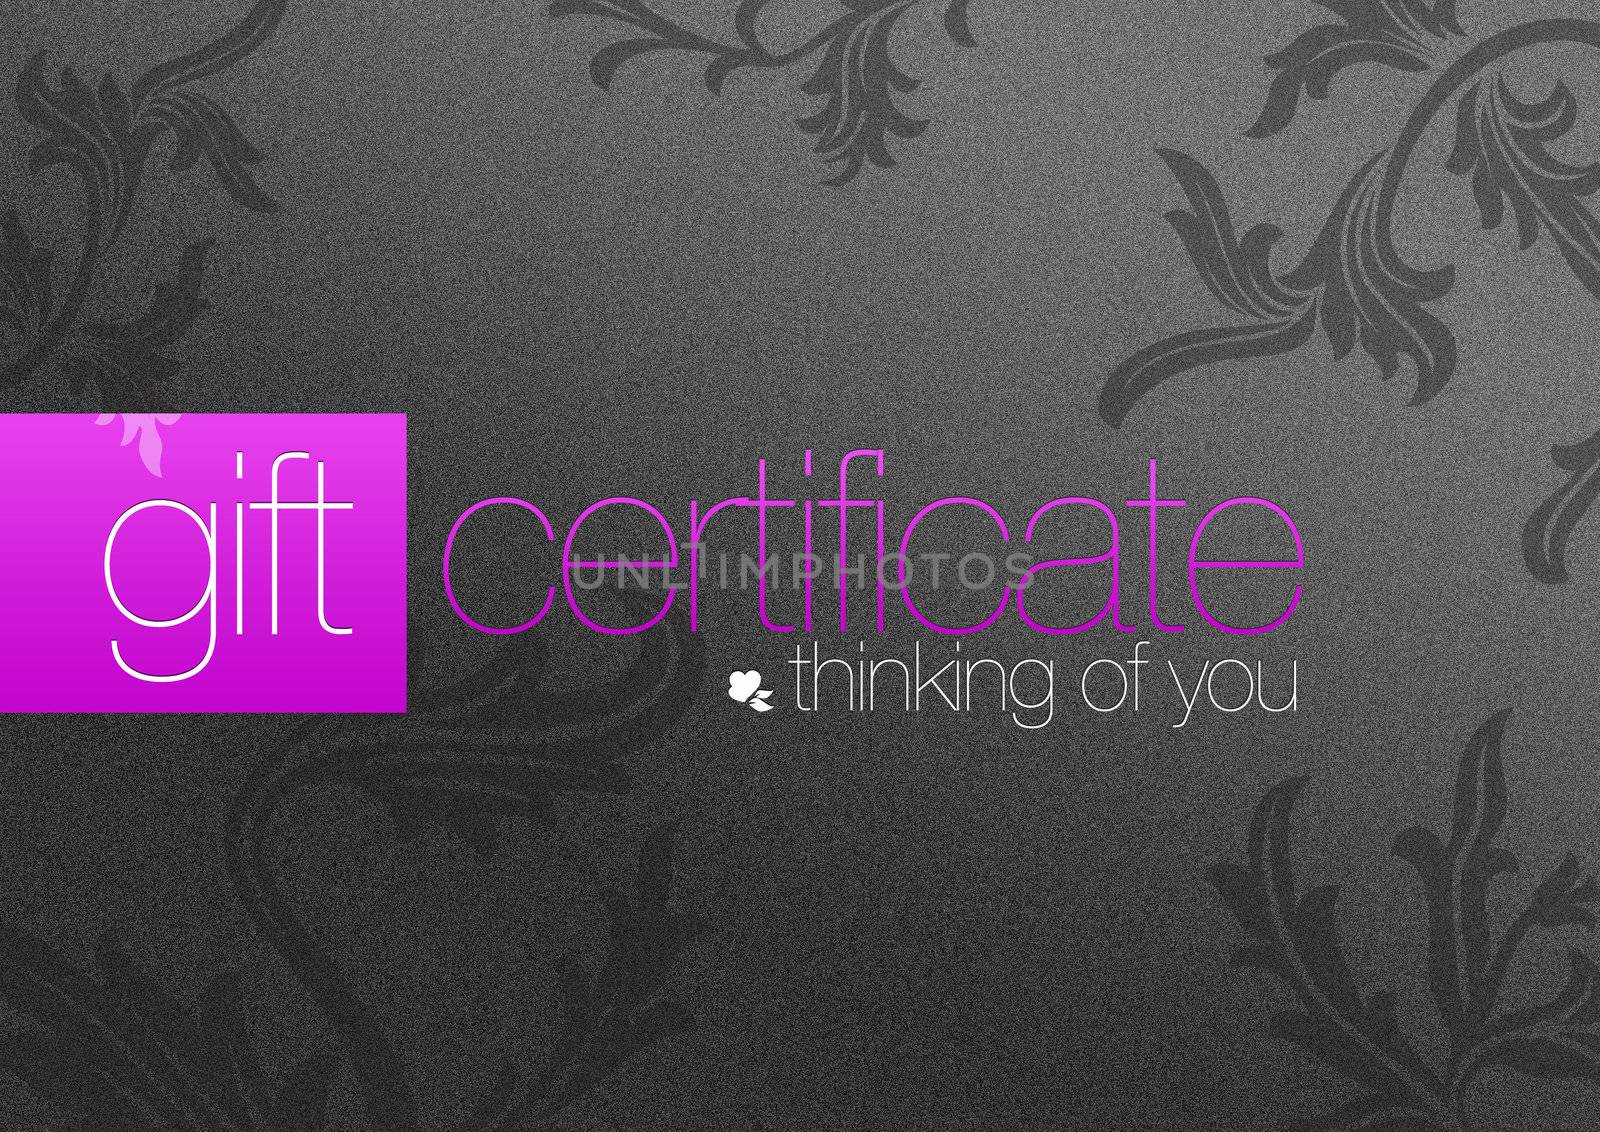 Gift Certificate with floral ornaments.